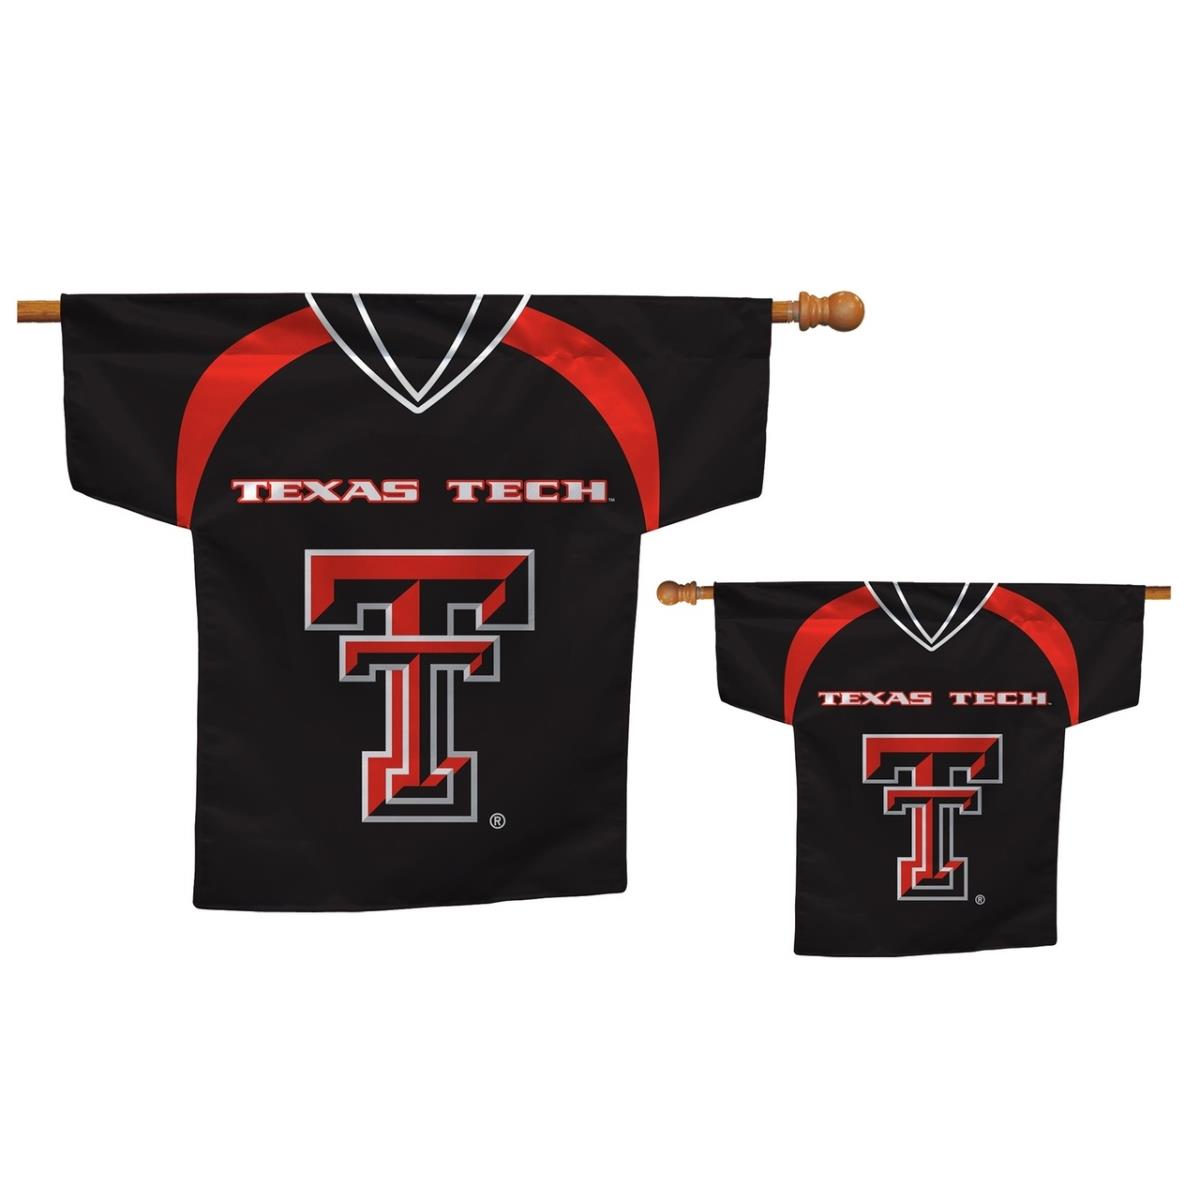 Picture of Fremont Die 2324553984 Texas Tech Red Raiders Flag - Jersey Design